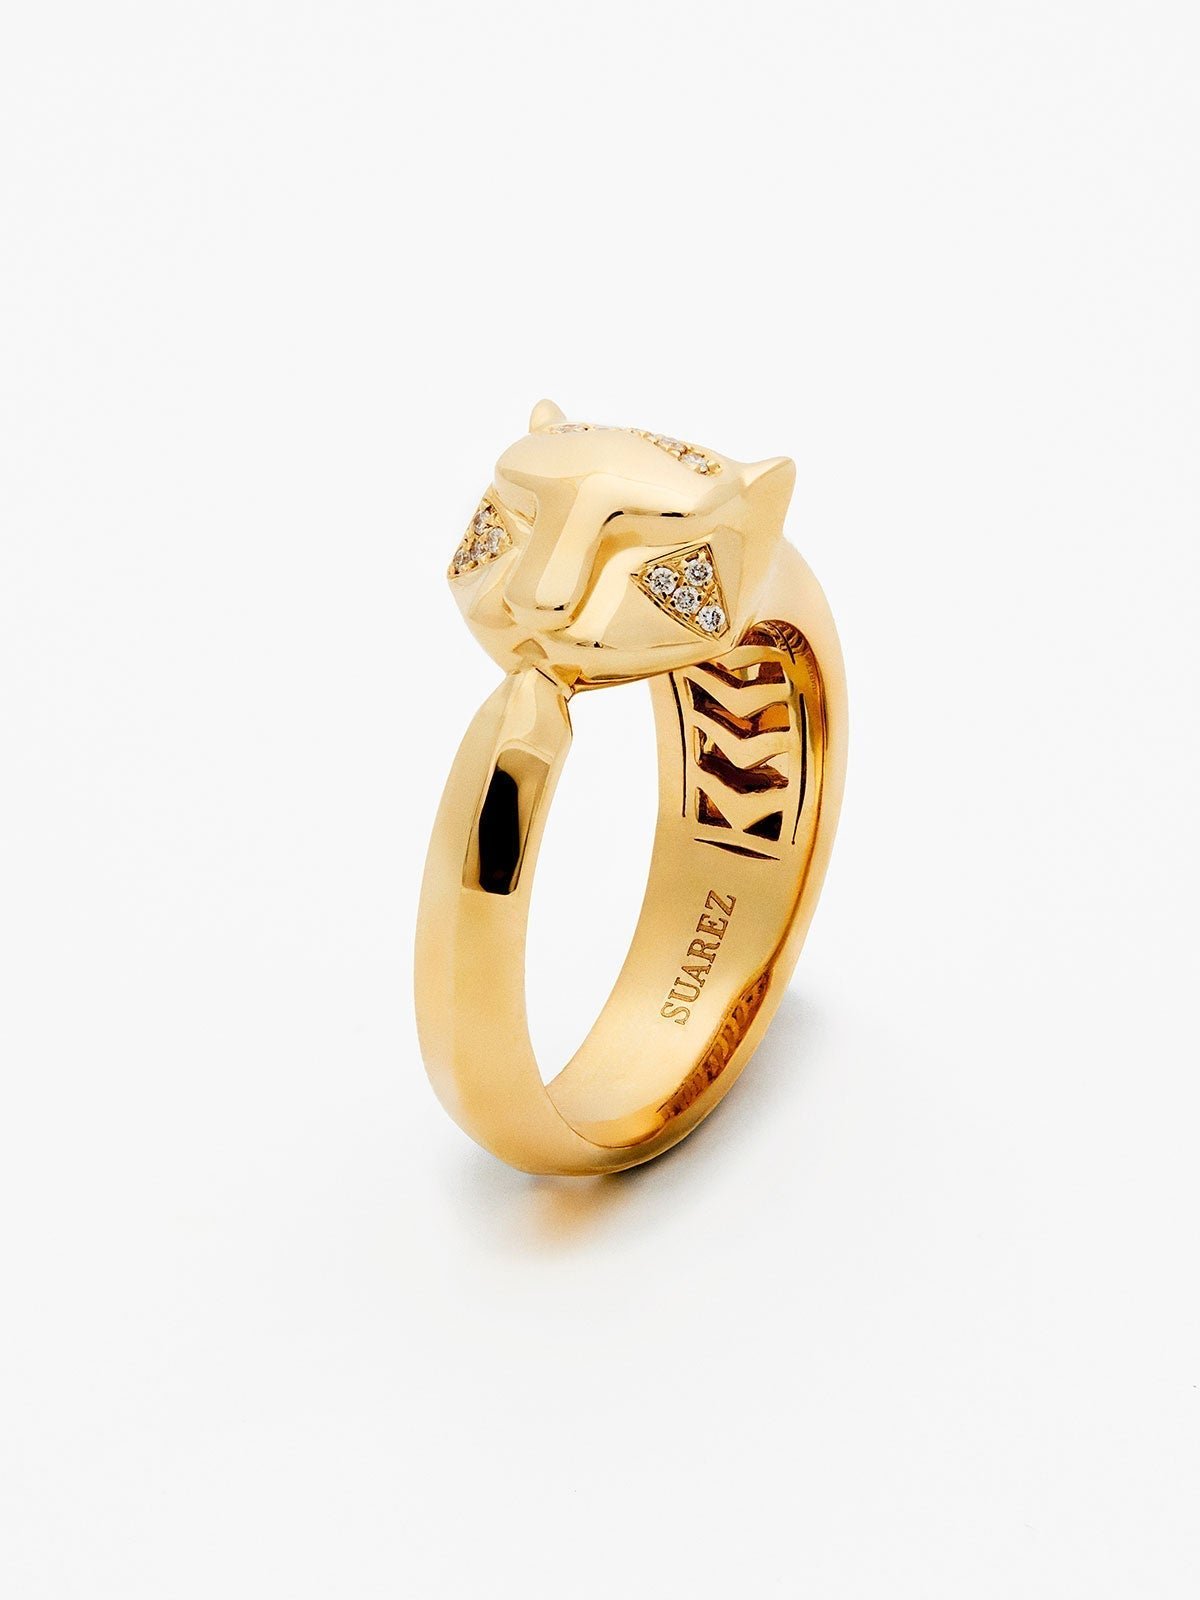 18K yellow gold ring with 26 brilliant-cut diamonds with a total of 0.08 cts and a tiger shape